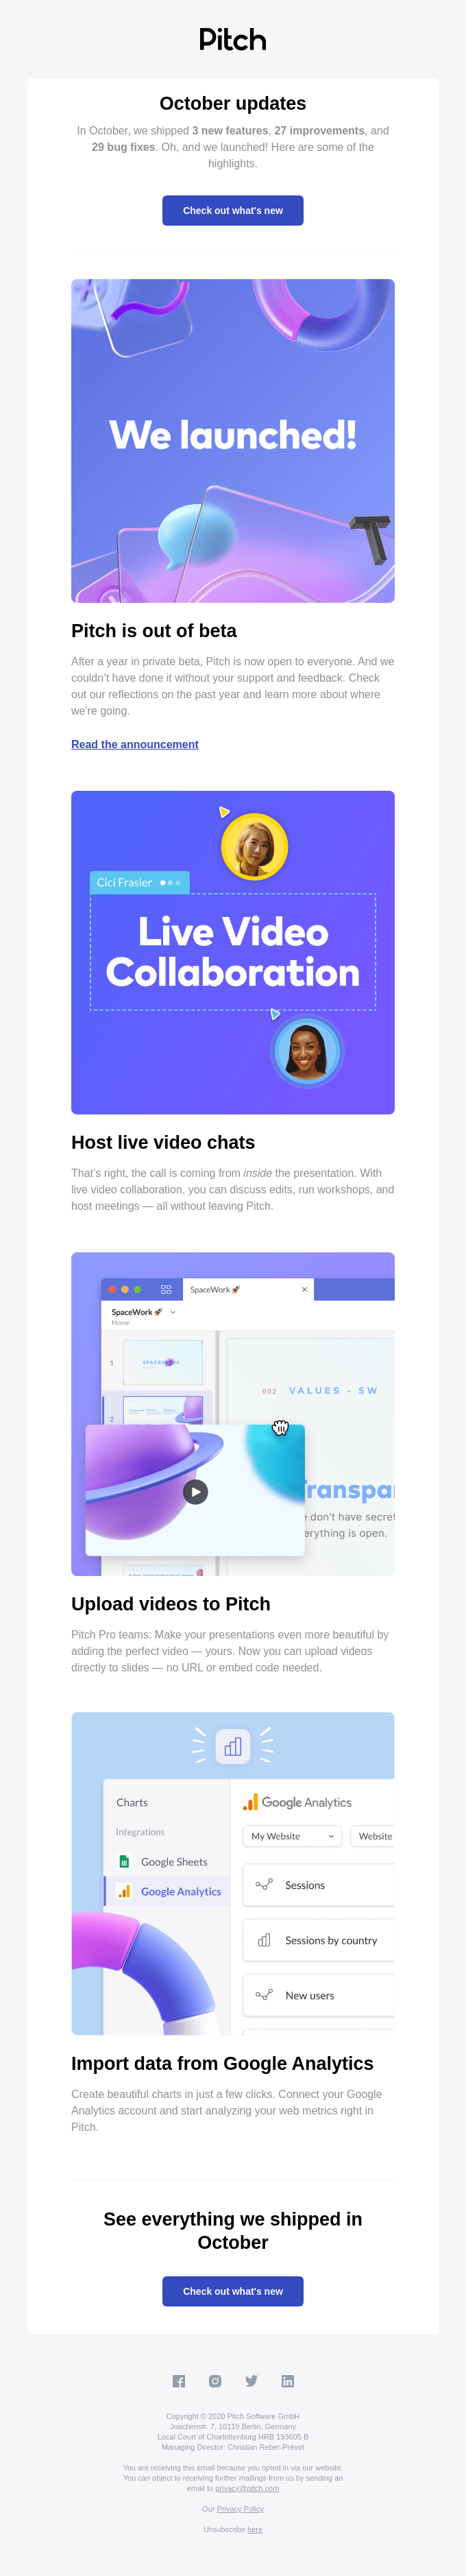 ✨New in Pitch: Live video collaboration, video upload + more - Pitch Email Newsletter